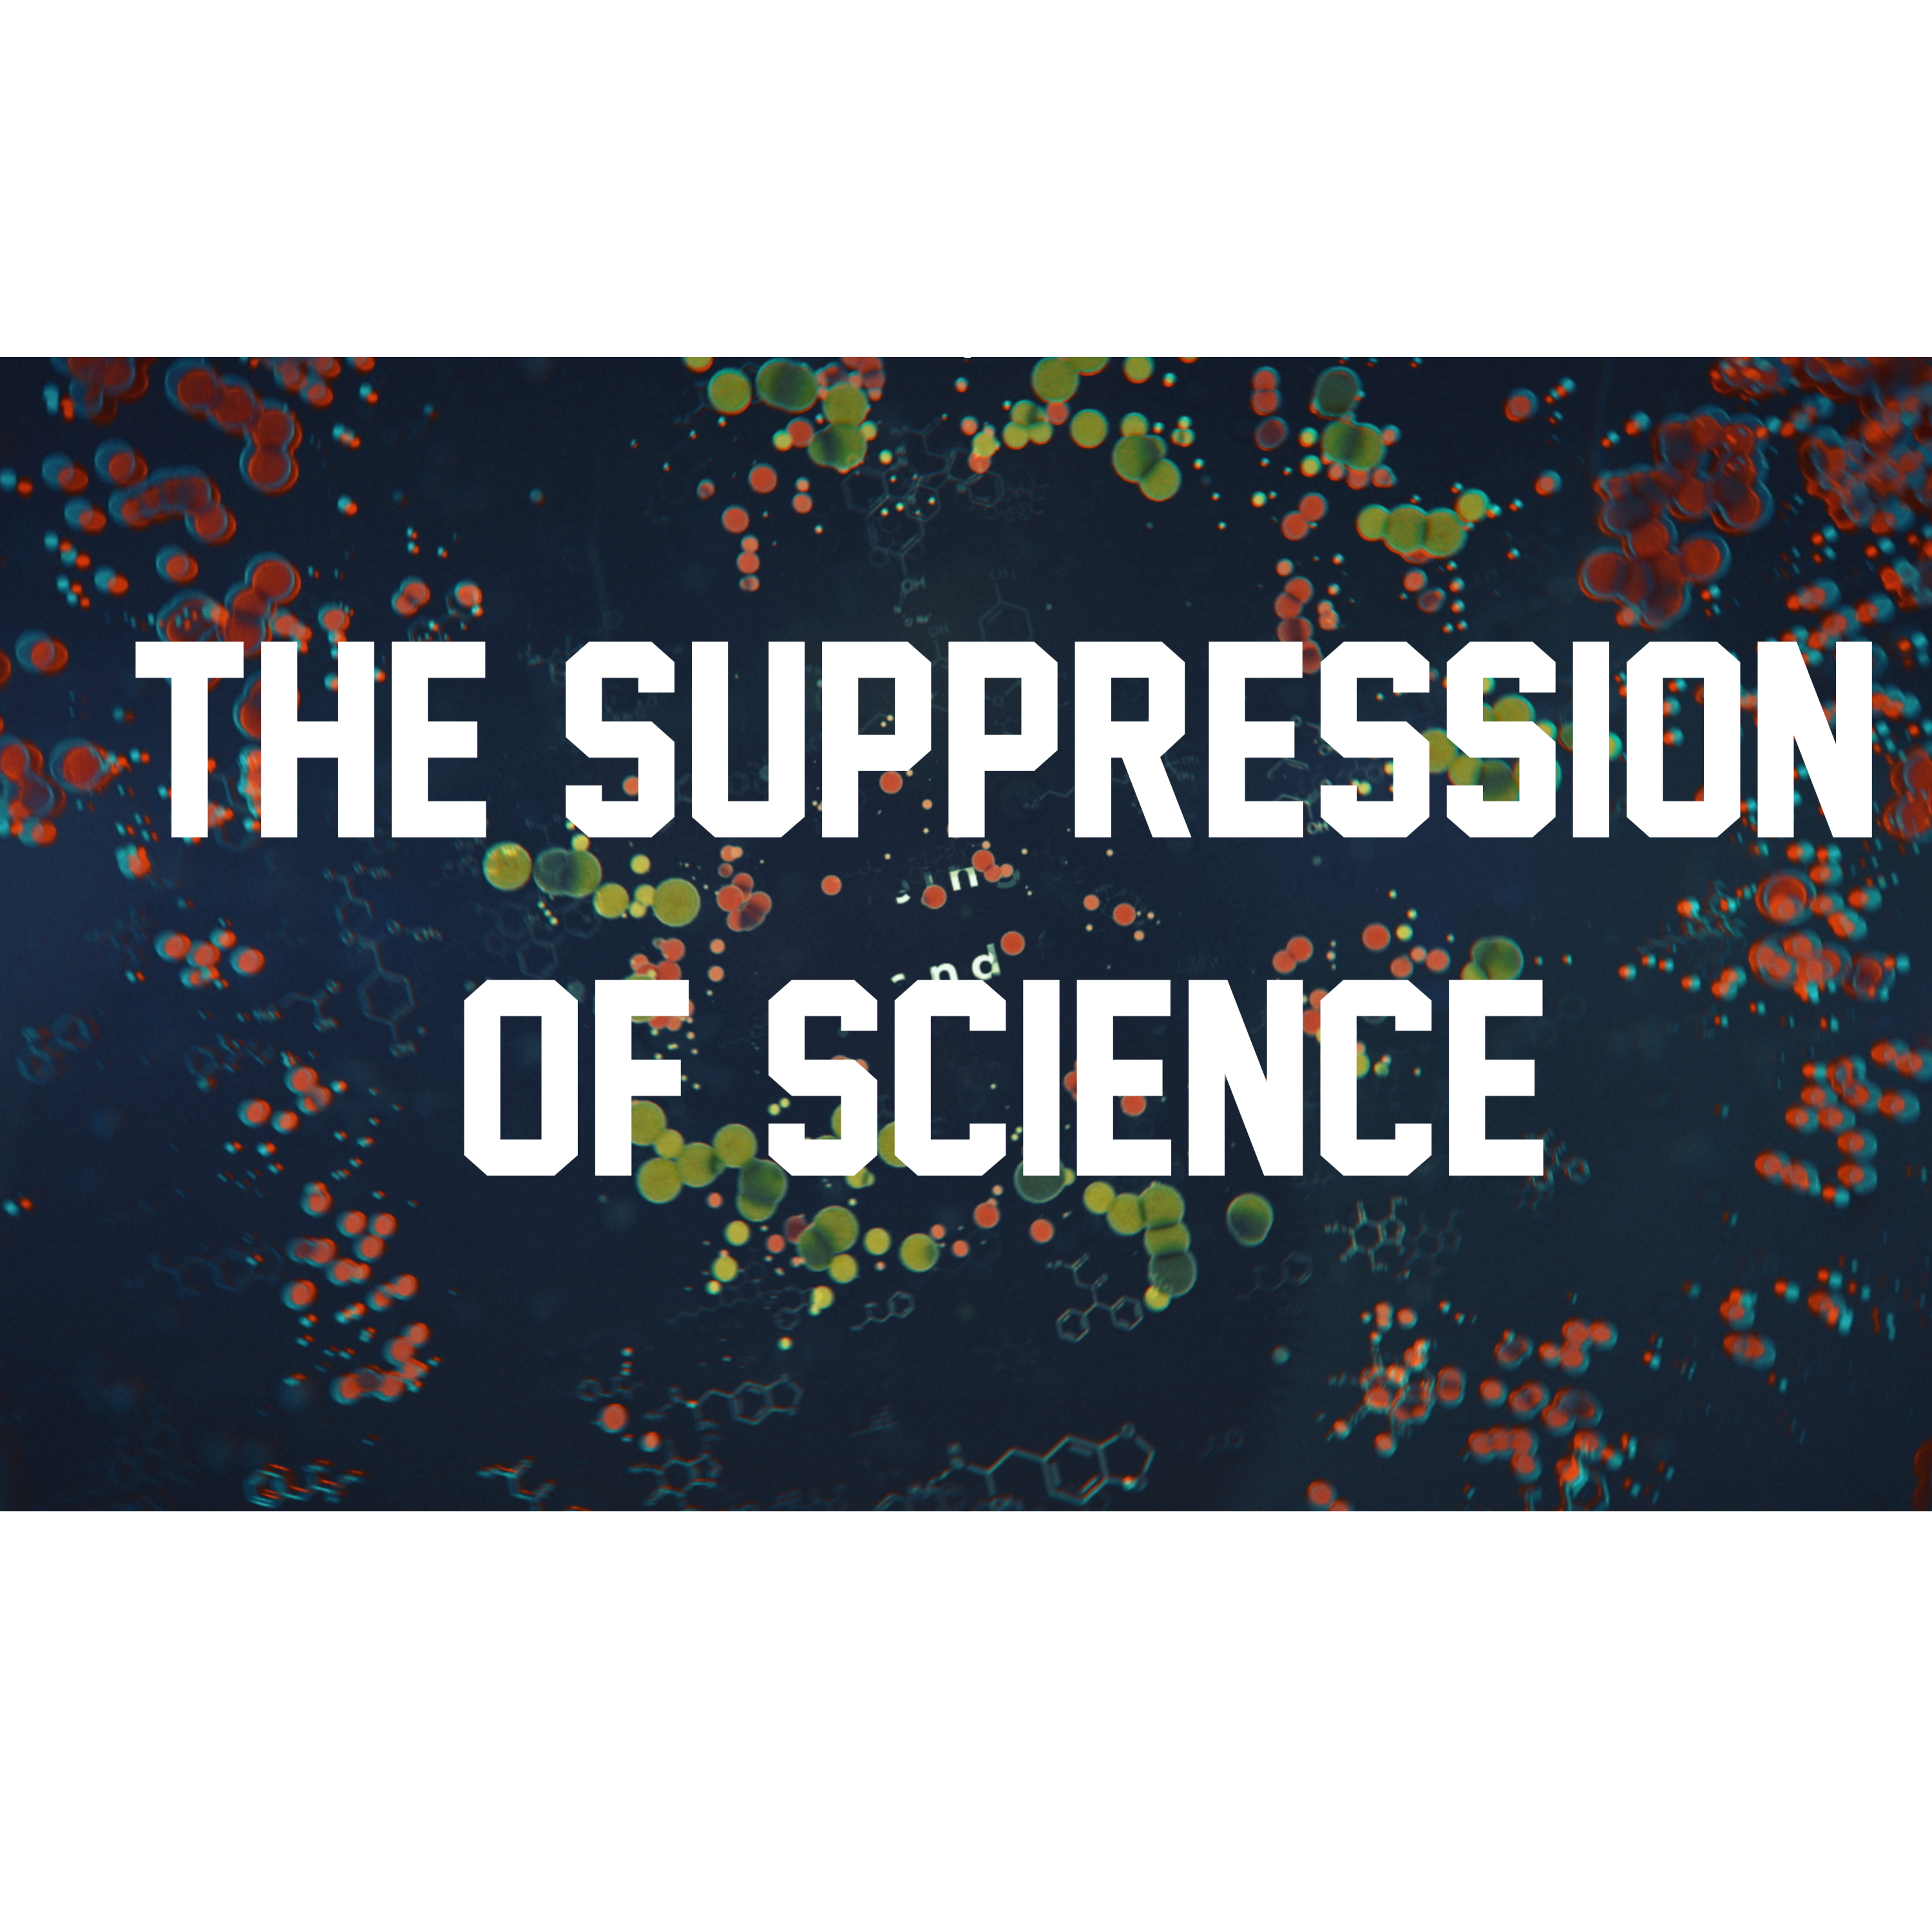 The Suppression of Science  - BMJ